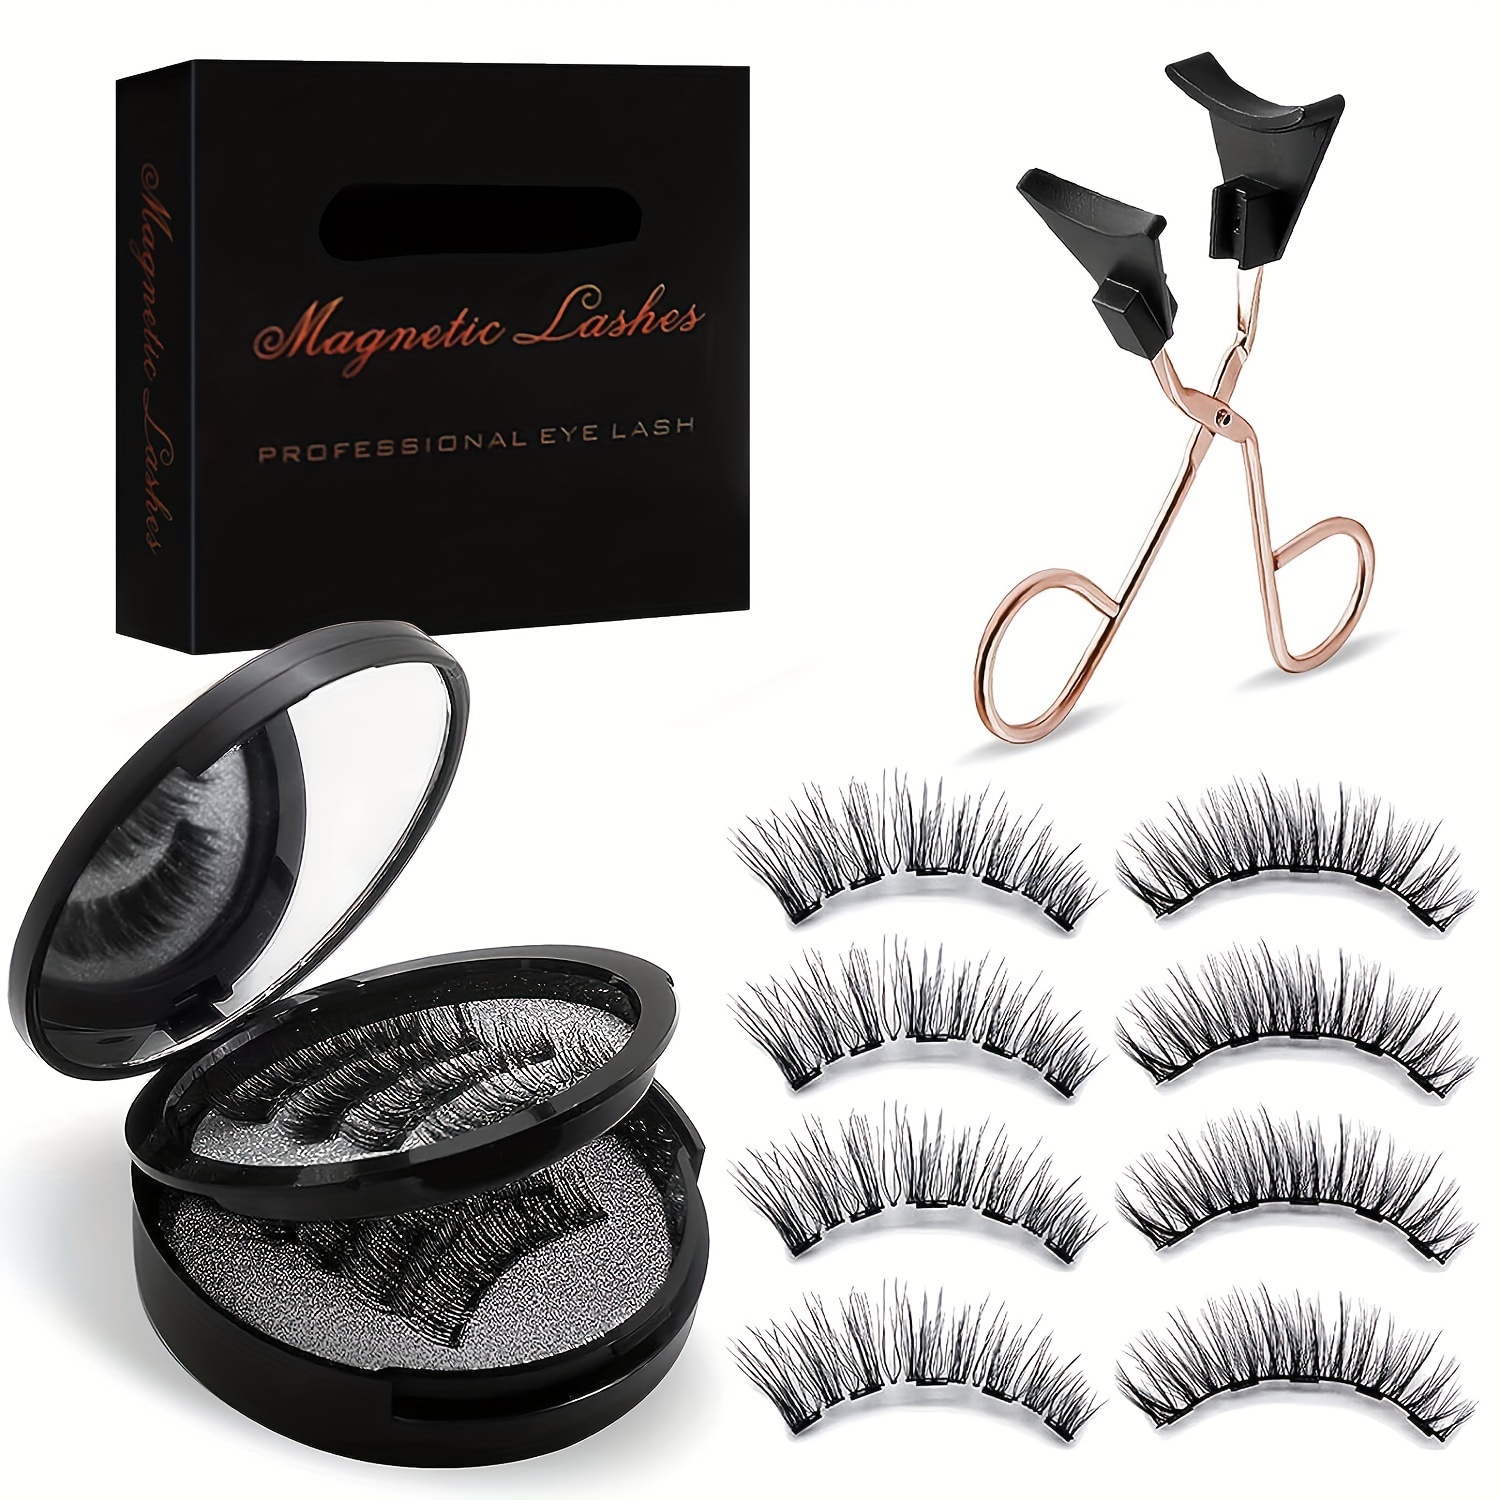 

Magnetic Eyelashes Without Eyeliner - Reusable Dual Magnetic Lashes With 8 Pair, Looking Natural No Glue 3d False Eyelashes Kit With Applicator, Reusable & Waterproof, No Glue, Easy To Wear